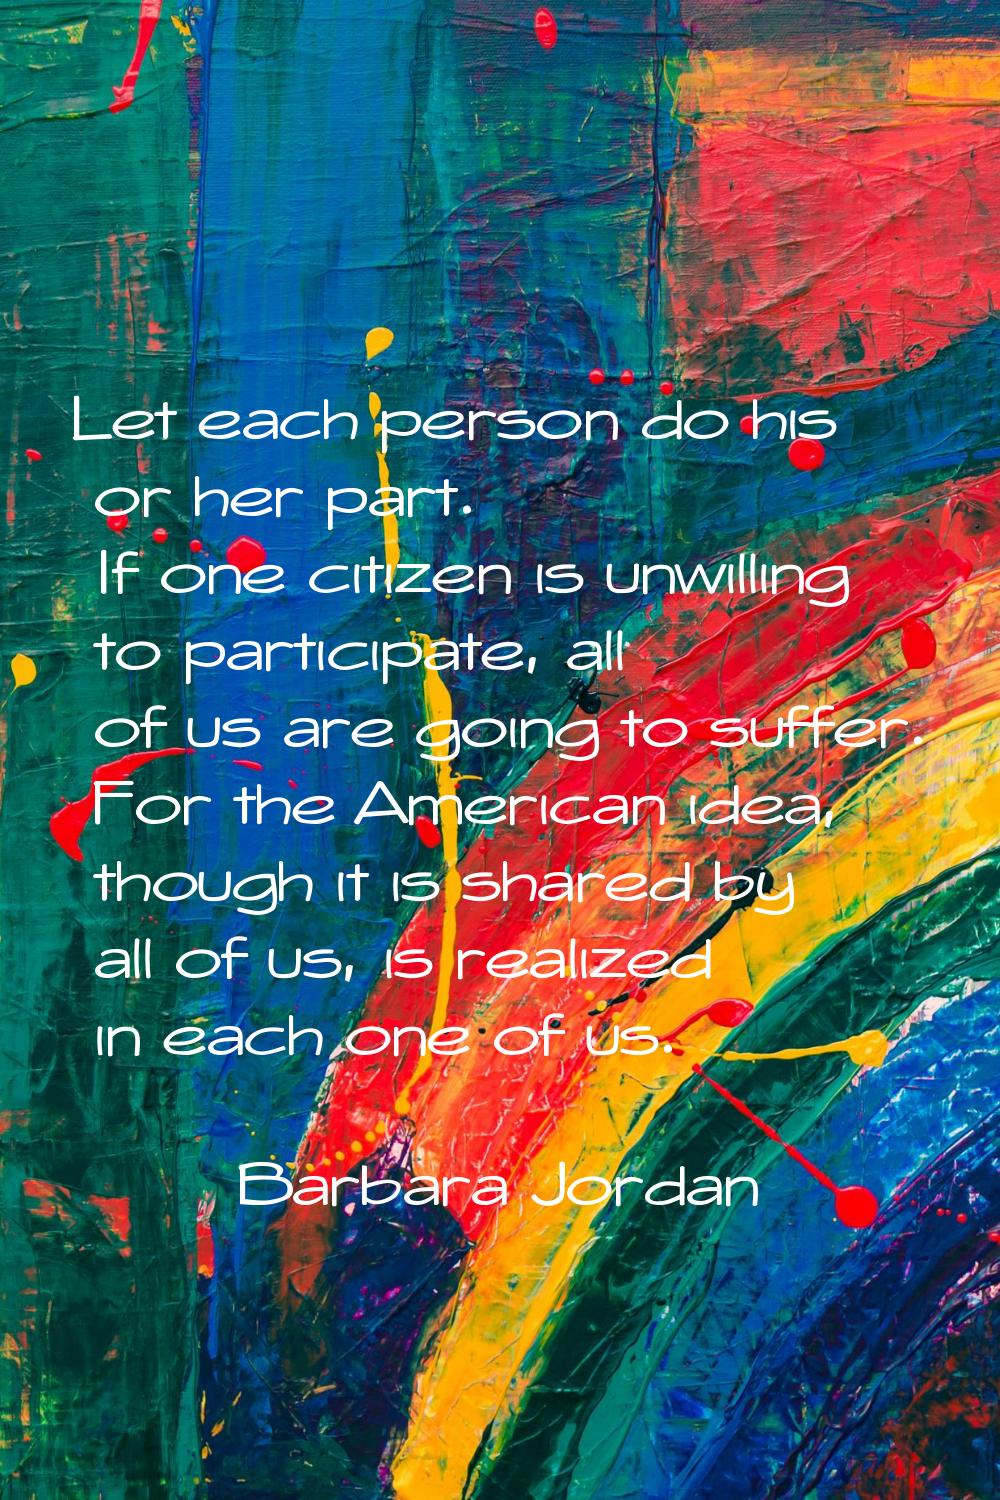 Let each person do his or her part. If one citizen is unwilling to participate, all of us are going